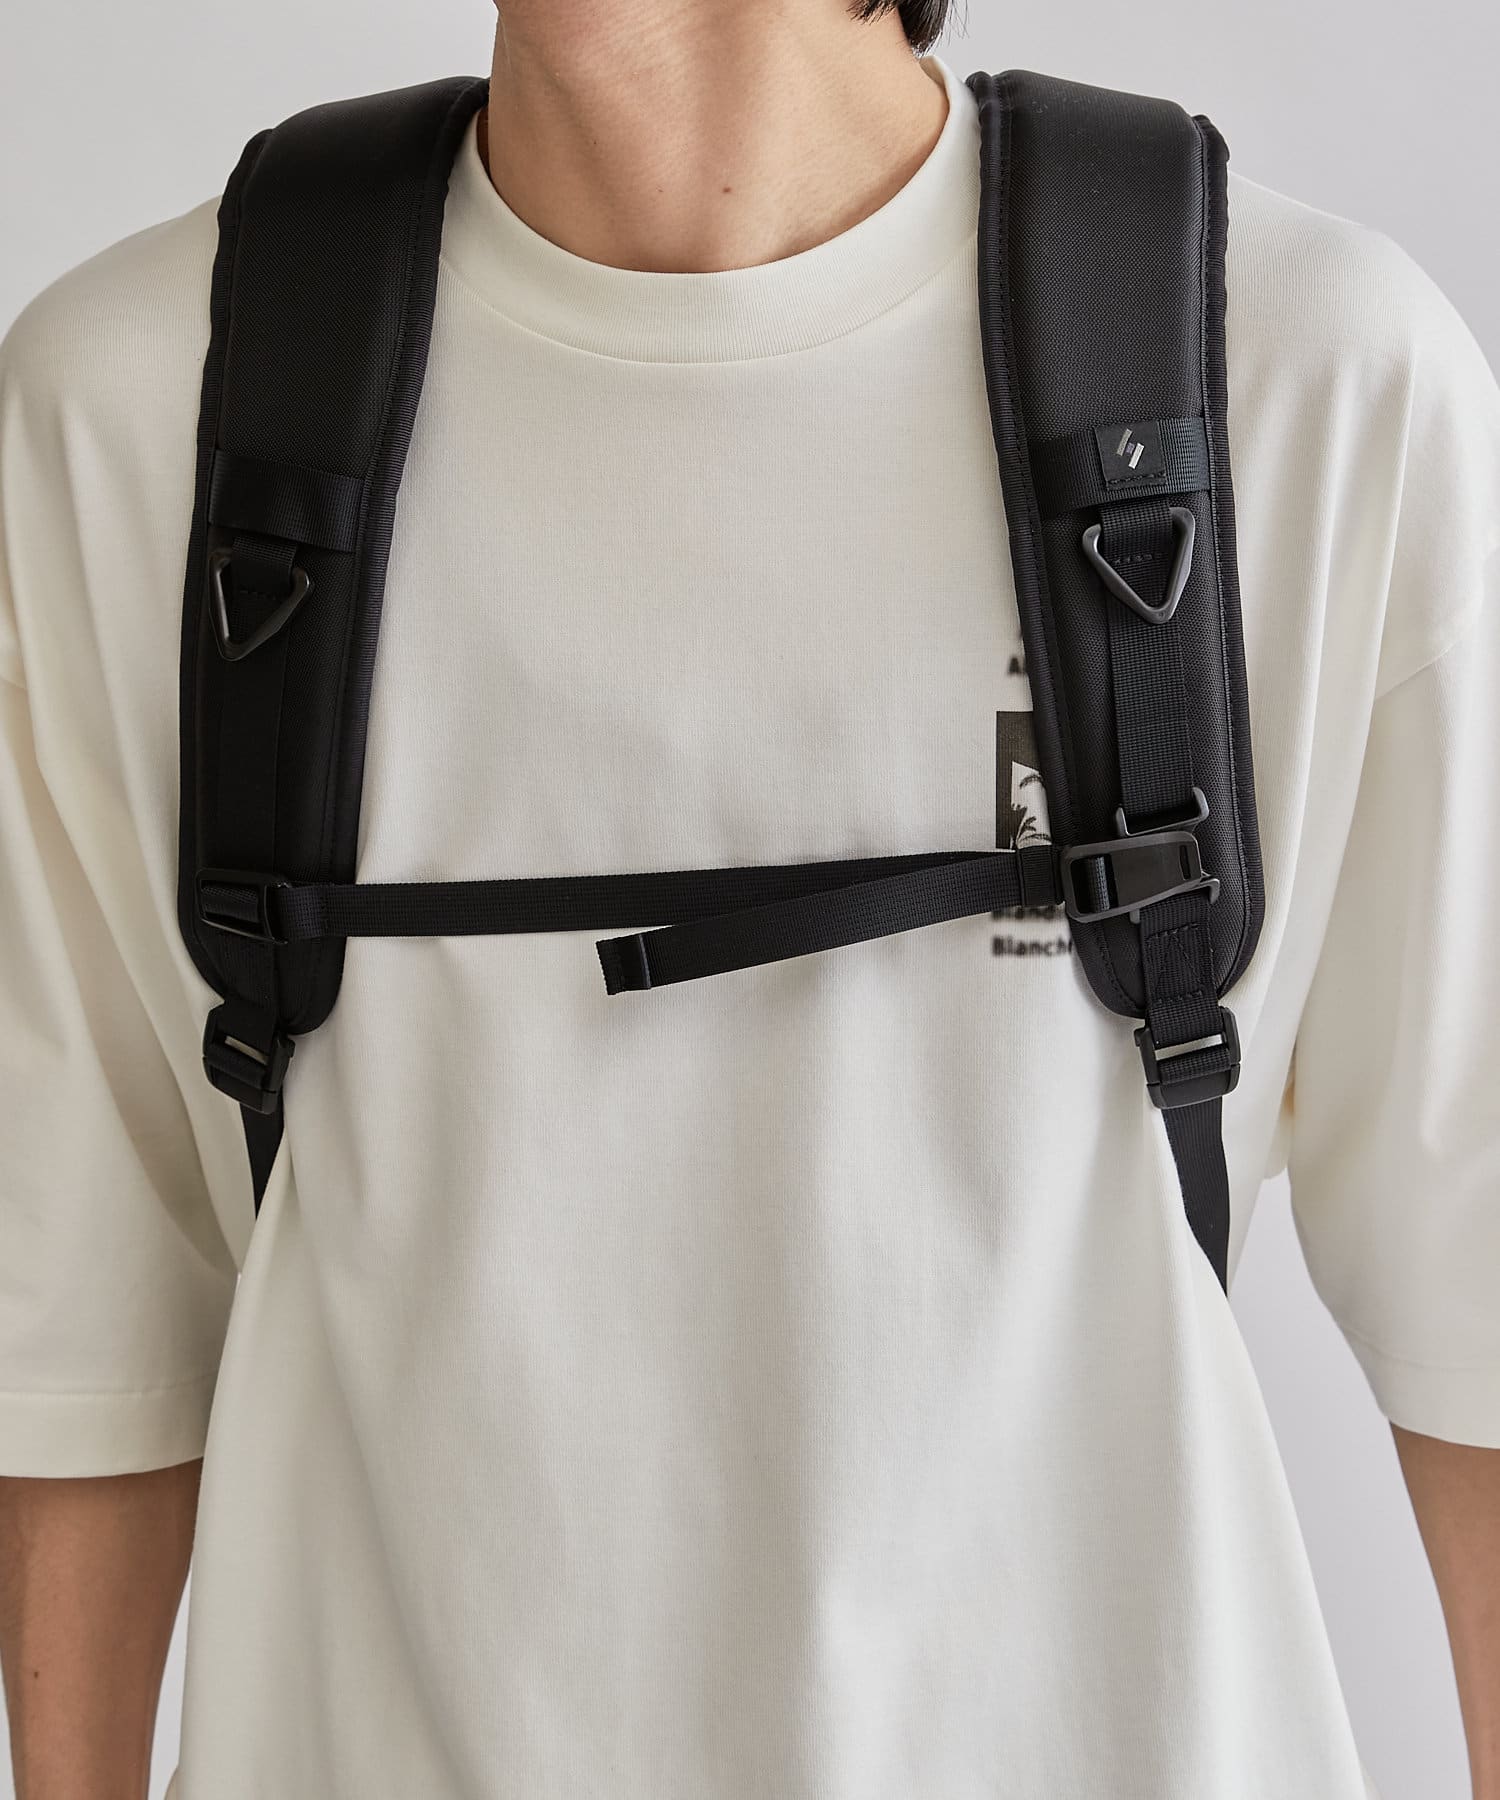 Lui's(ルイス) 【CIE / シー】VARIOUS BACKPACK 02 S(バックパック)